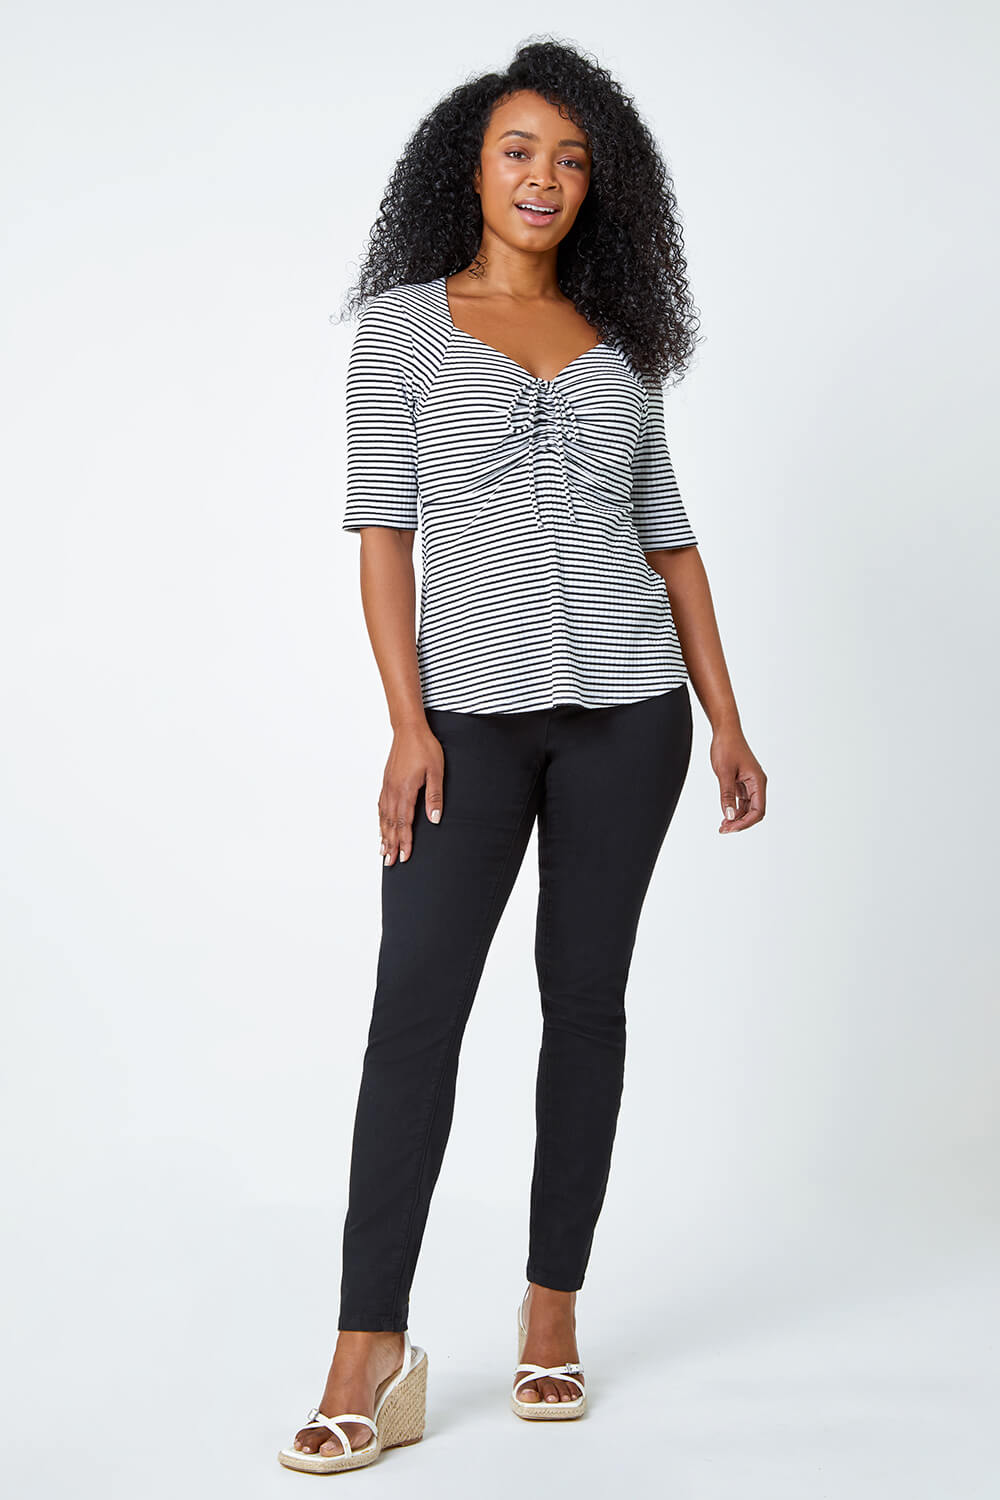 Black Petite Stripe Ruched Stretch Top, Image 4 of 5